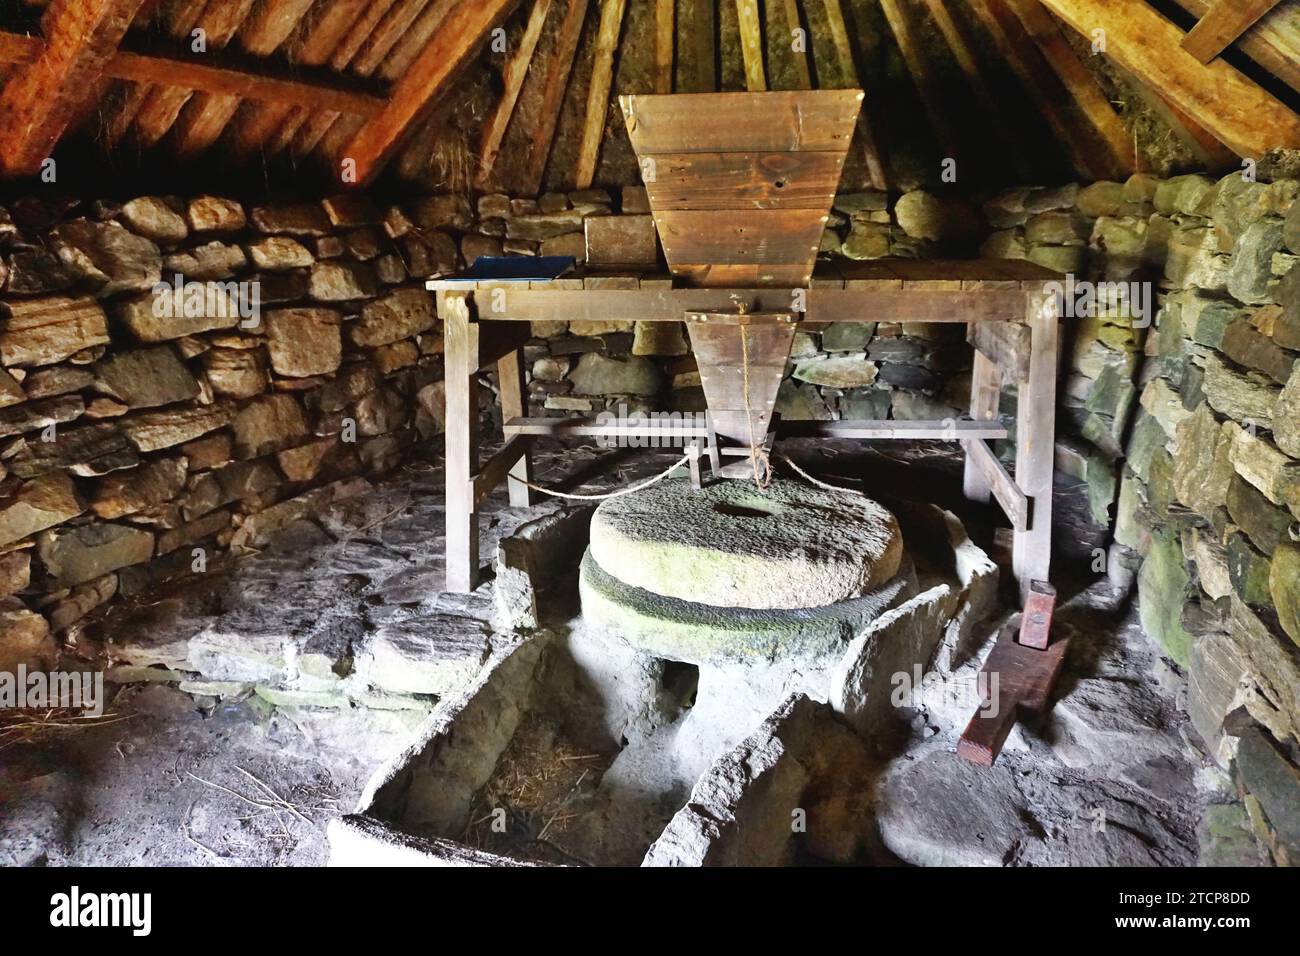 Interior of the historic Norse mill on Lewis Island, Scotland. A nearby stream powers a waterwheel that turns the grindstones to grind corn into meal. Stock Photo